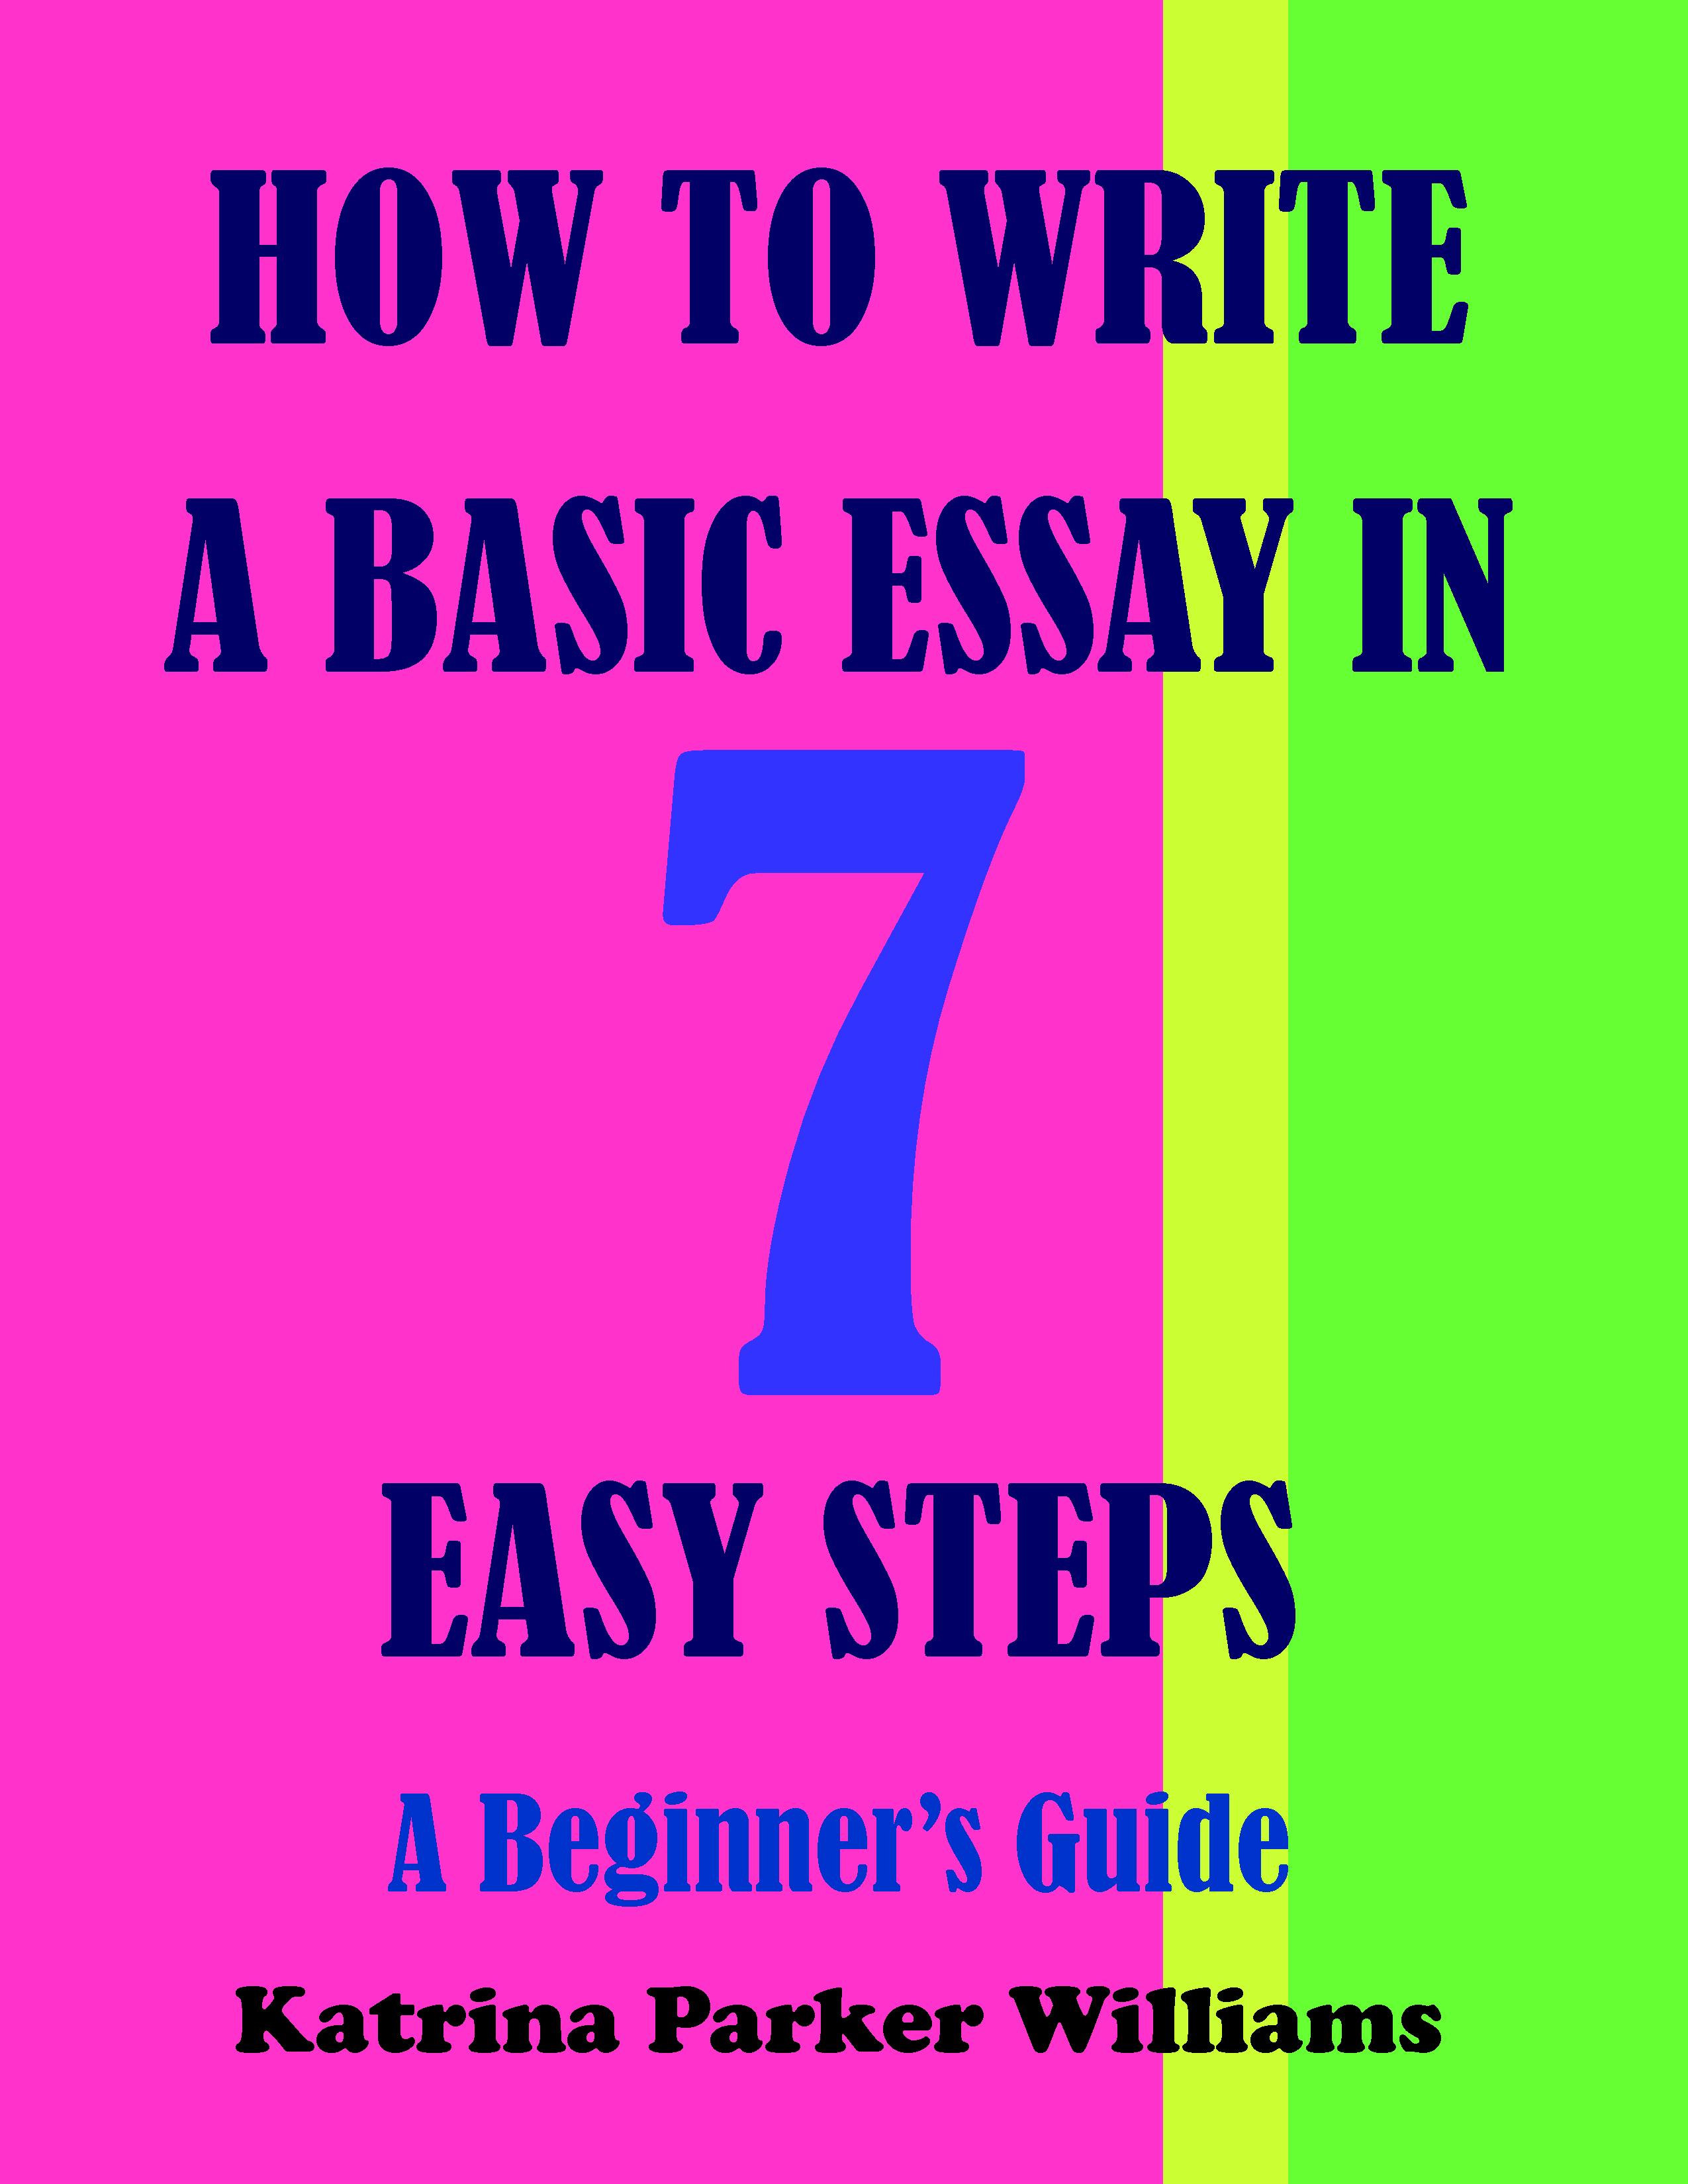 easy steps on how to write an essay